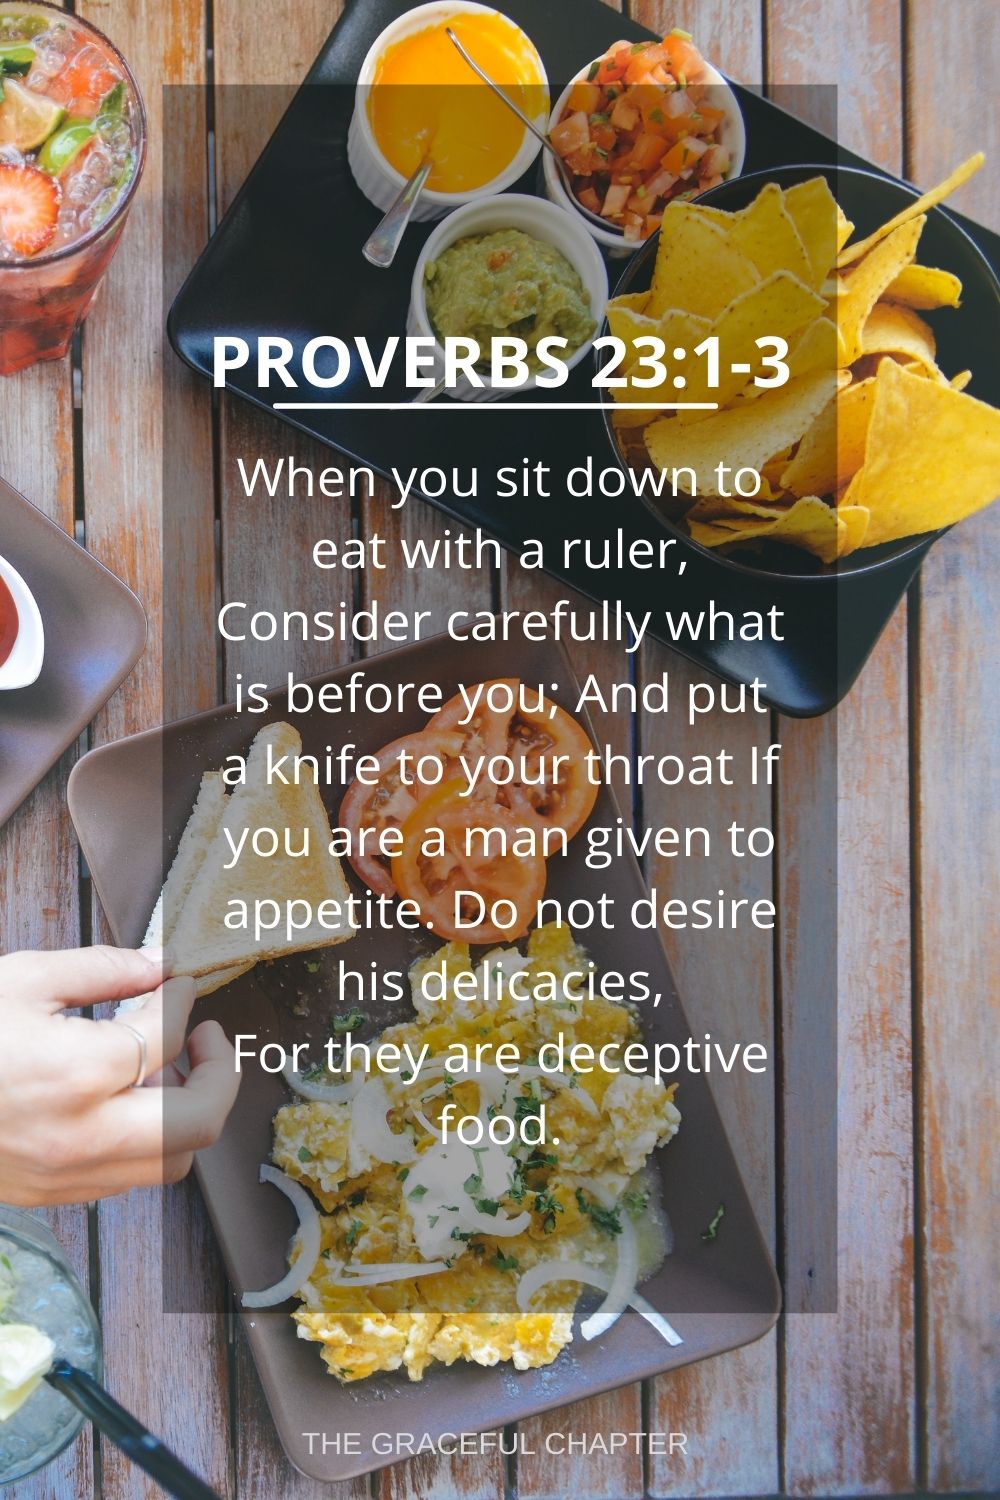 When you sit down to eat with a ruler, Consider carefully what is before you; And put a knife to your throat If you are a man given to appetite. Do not desire his delicacies, For they are deceptive food. Proverbs 23:1-3